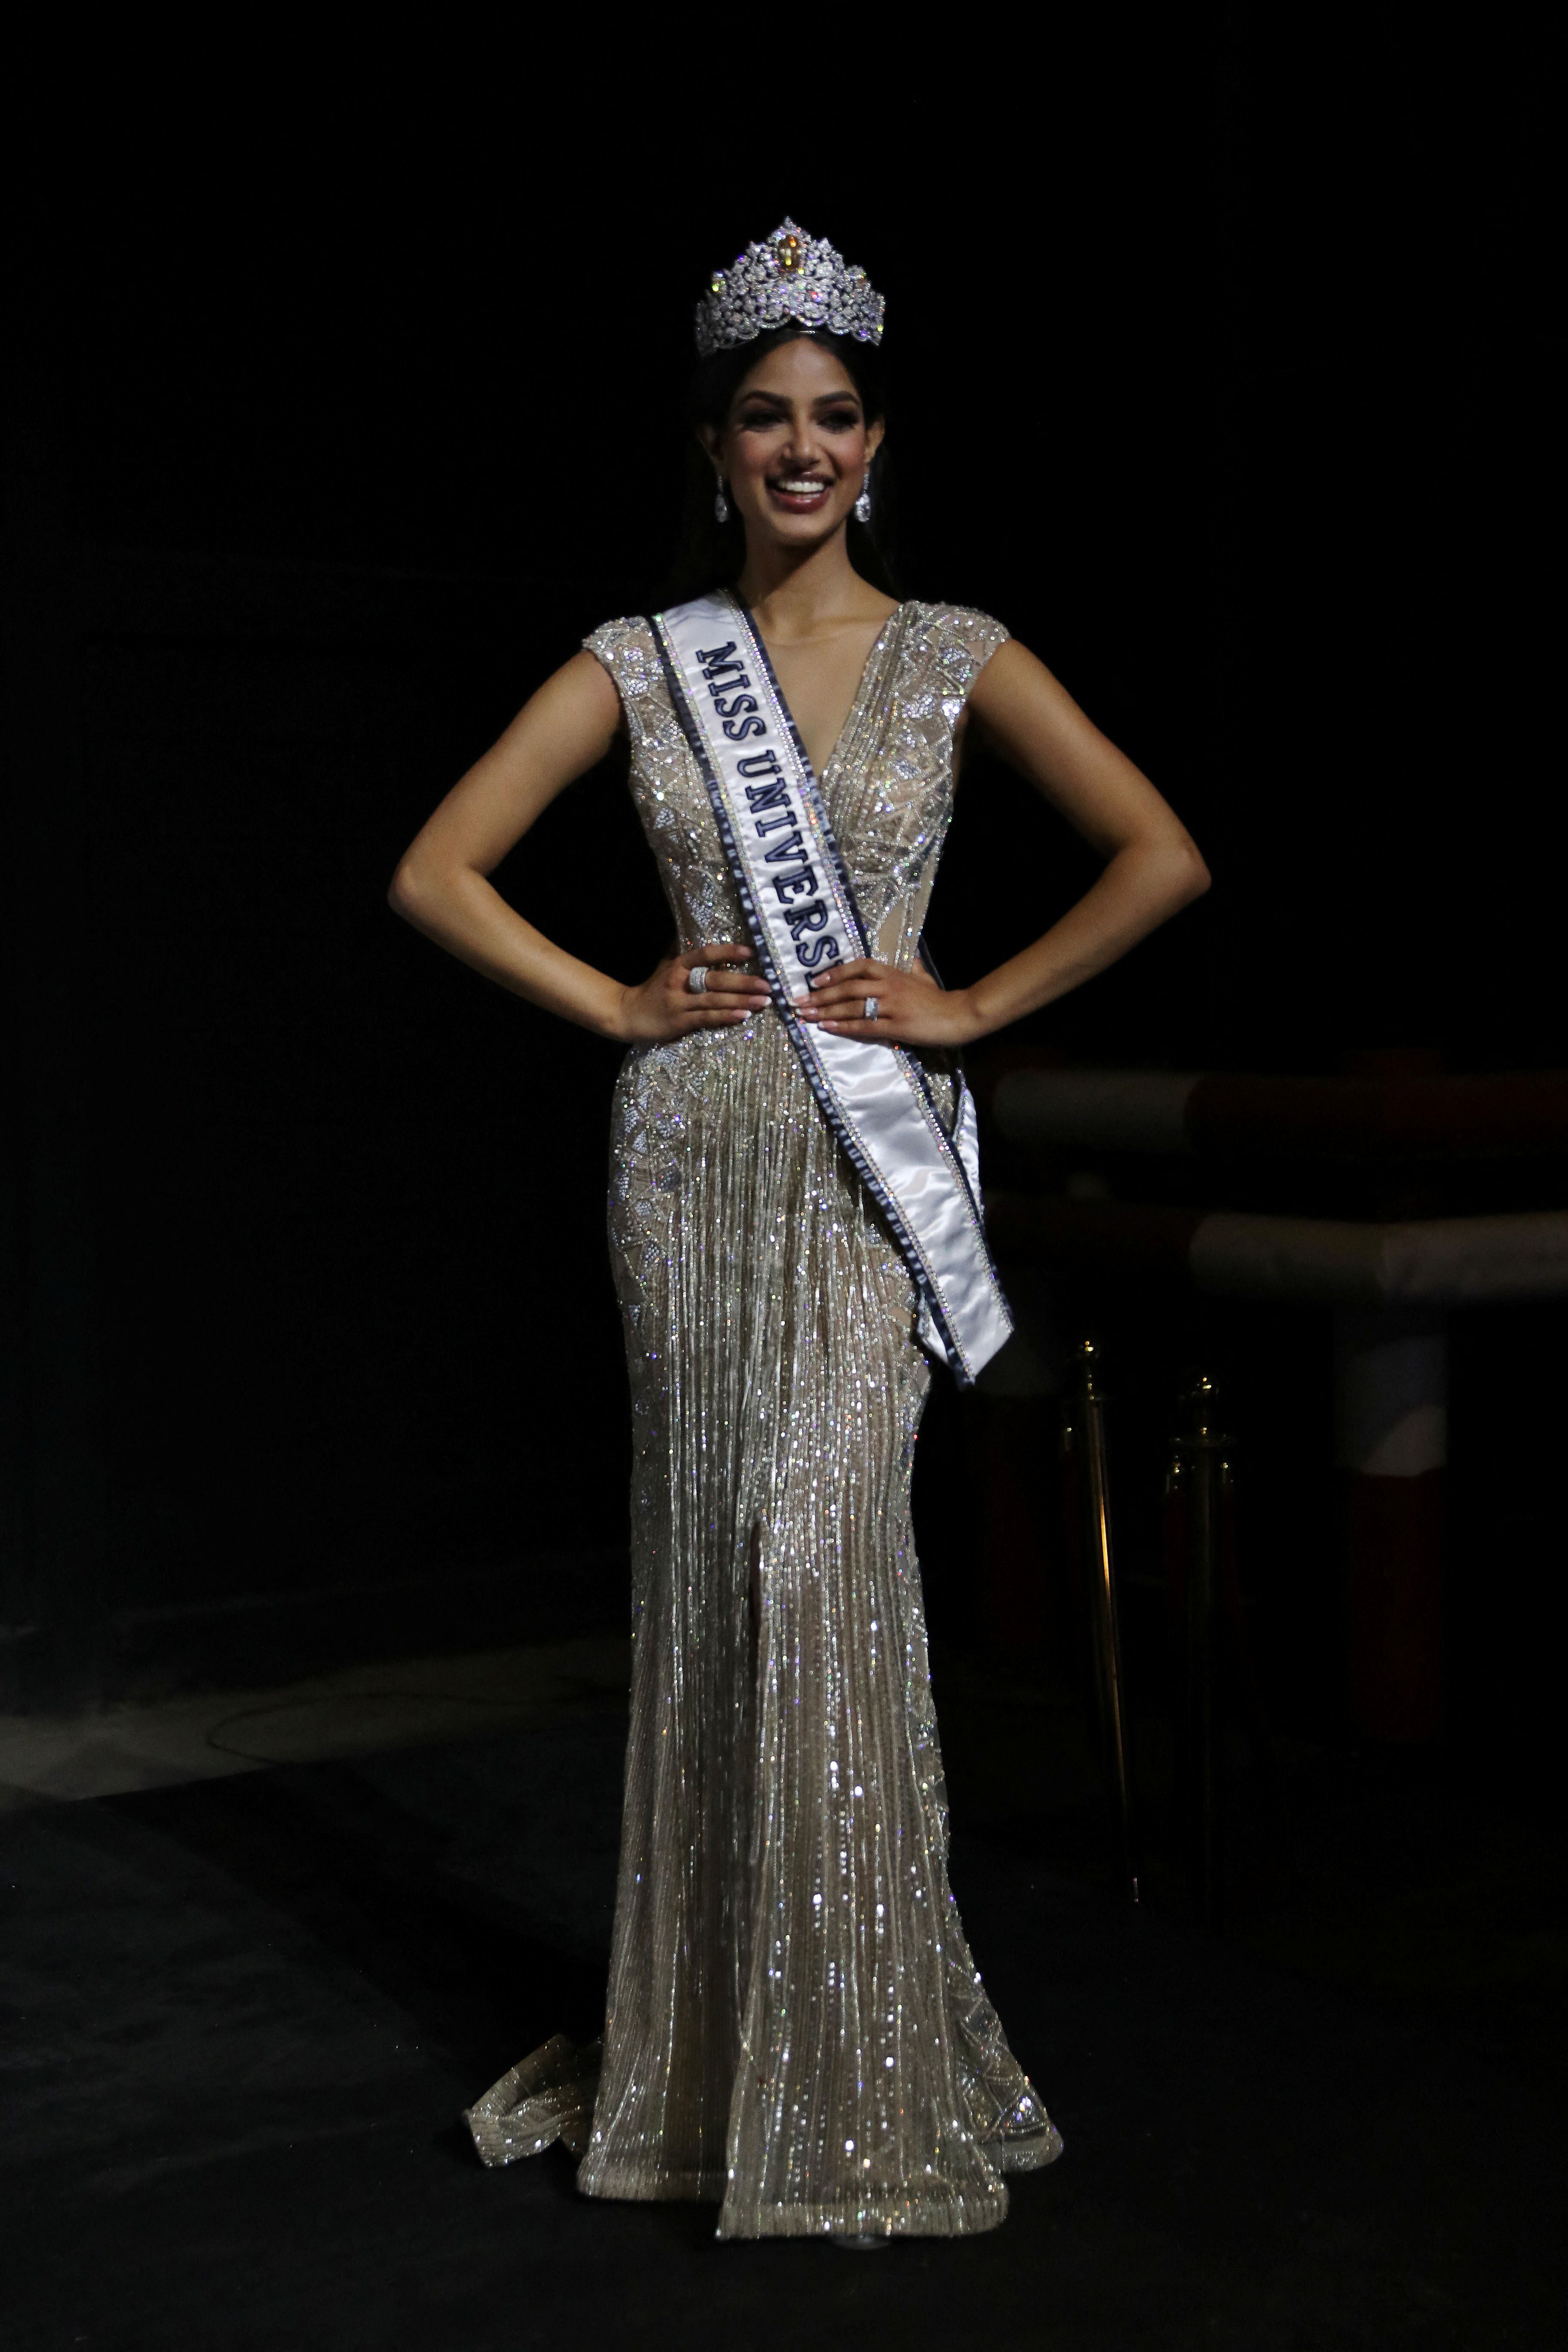 Miss Universe Harnaaz Sandhu of India poses at a press conference after winning the Miss Universe pageant, in the Red Sea resort of Eilat, Israel, on December 13, 2021. REUTERS / Ronen Zvulun